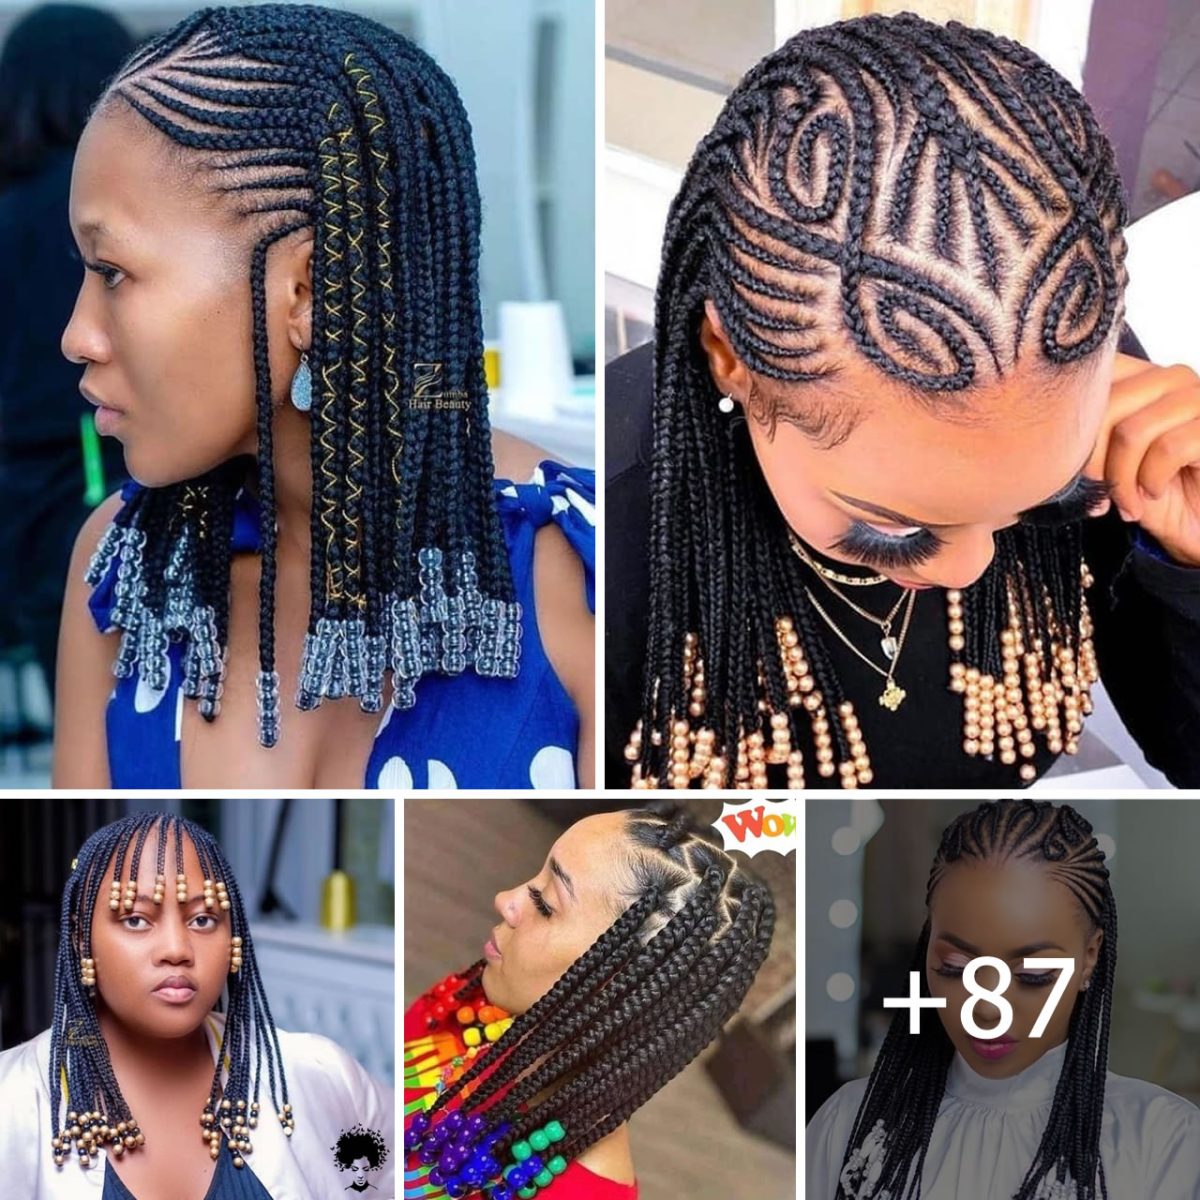 Stylish Recent Braided Hairstyles You Should Consider, Volume 4.